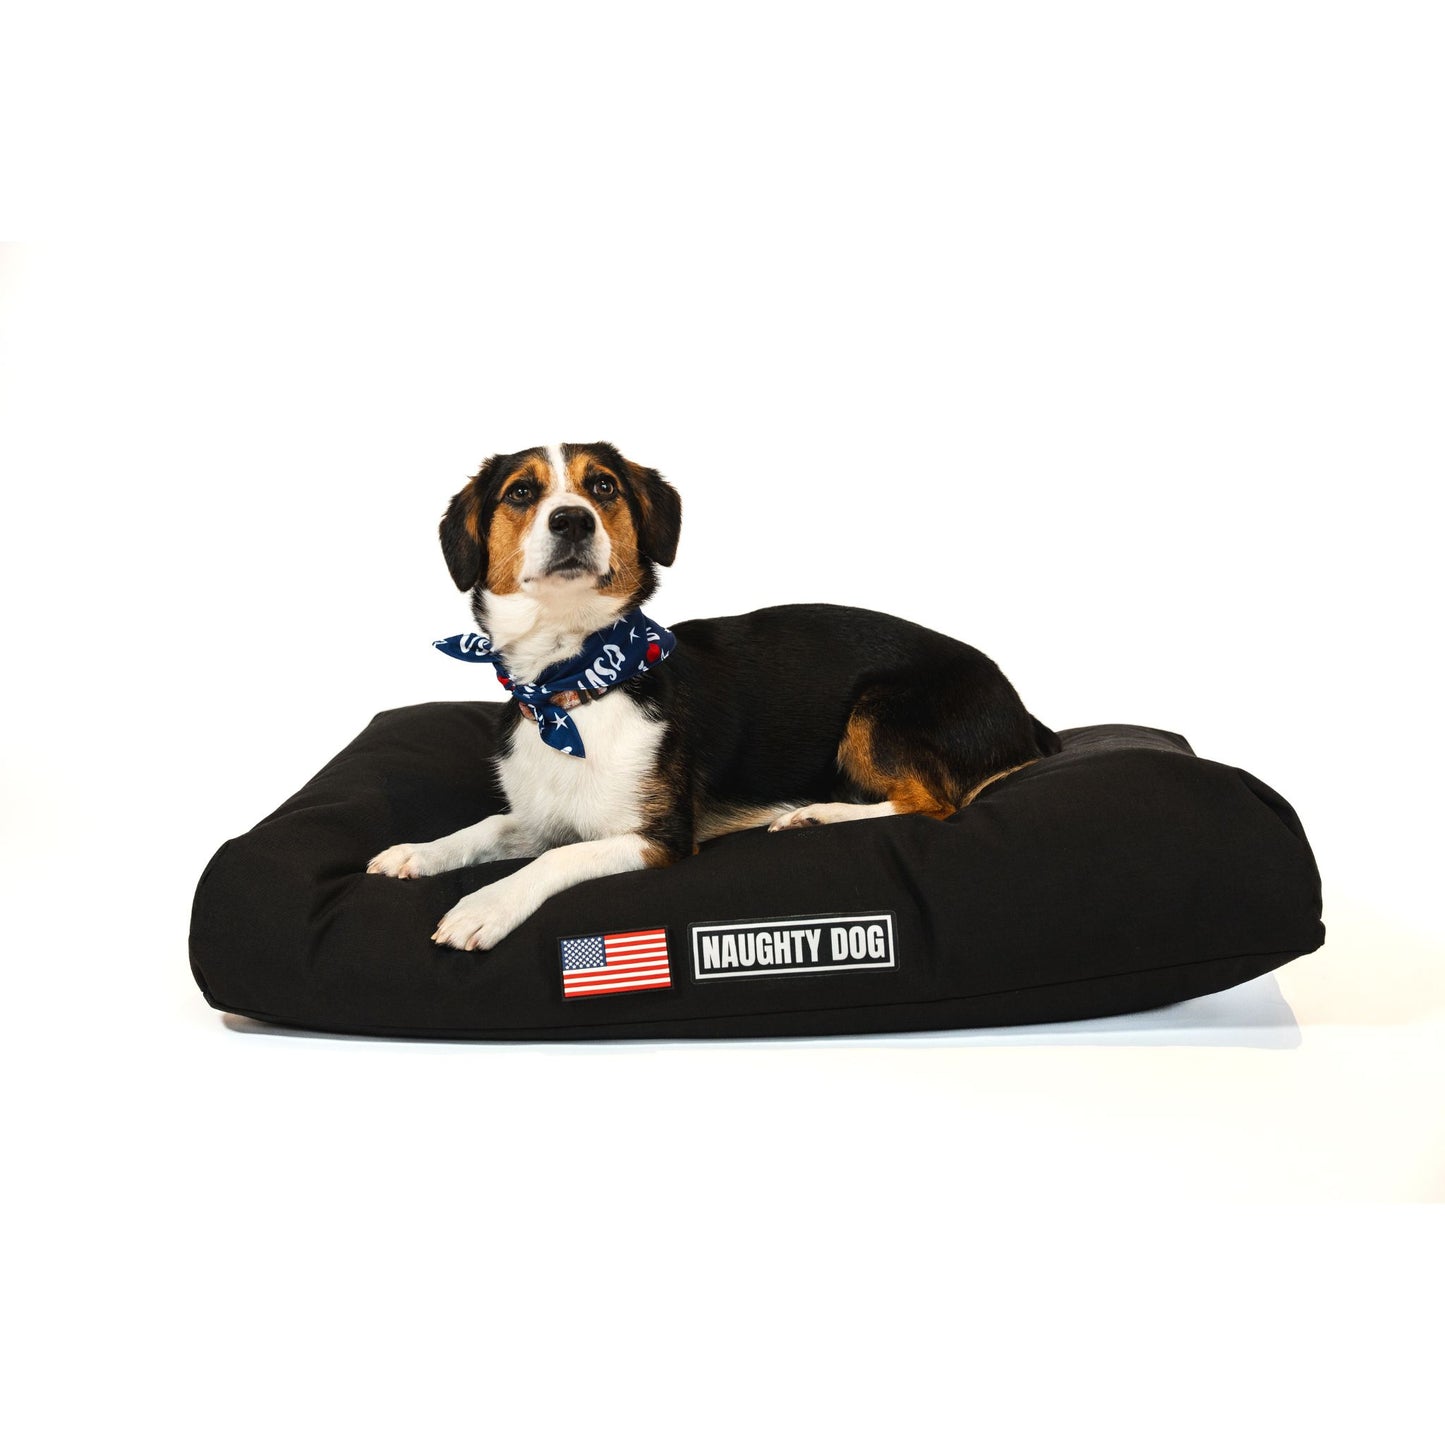 The Naughty Dog Bed